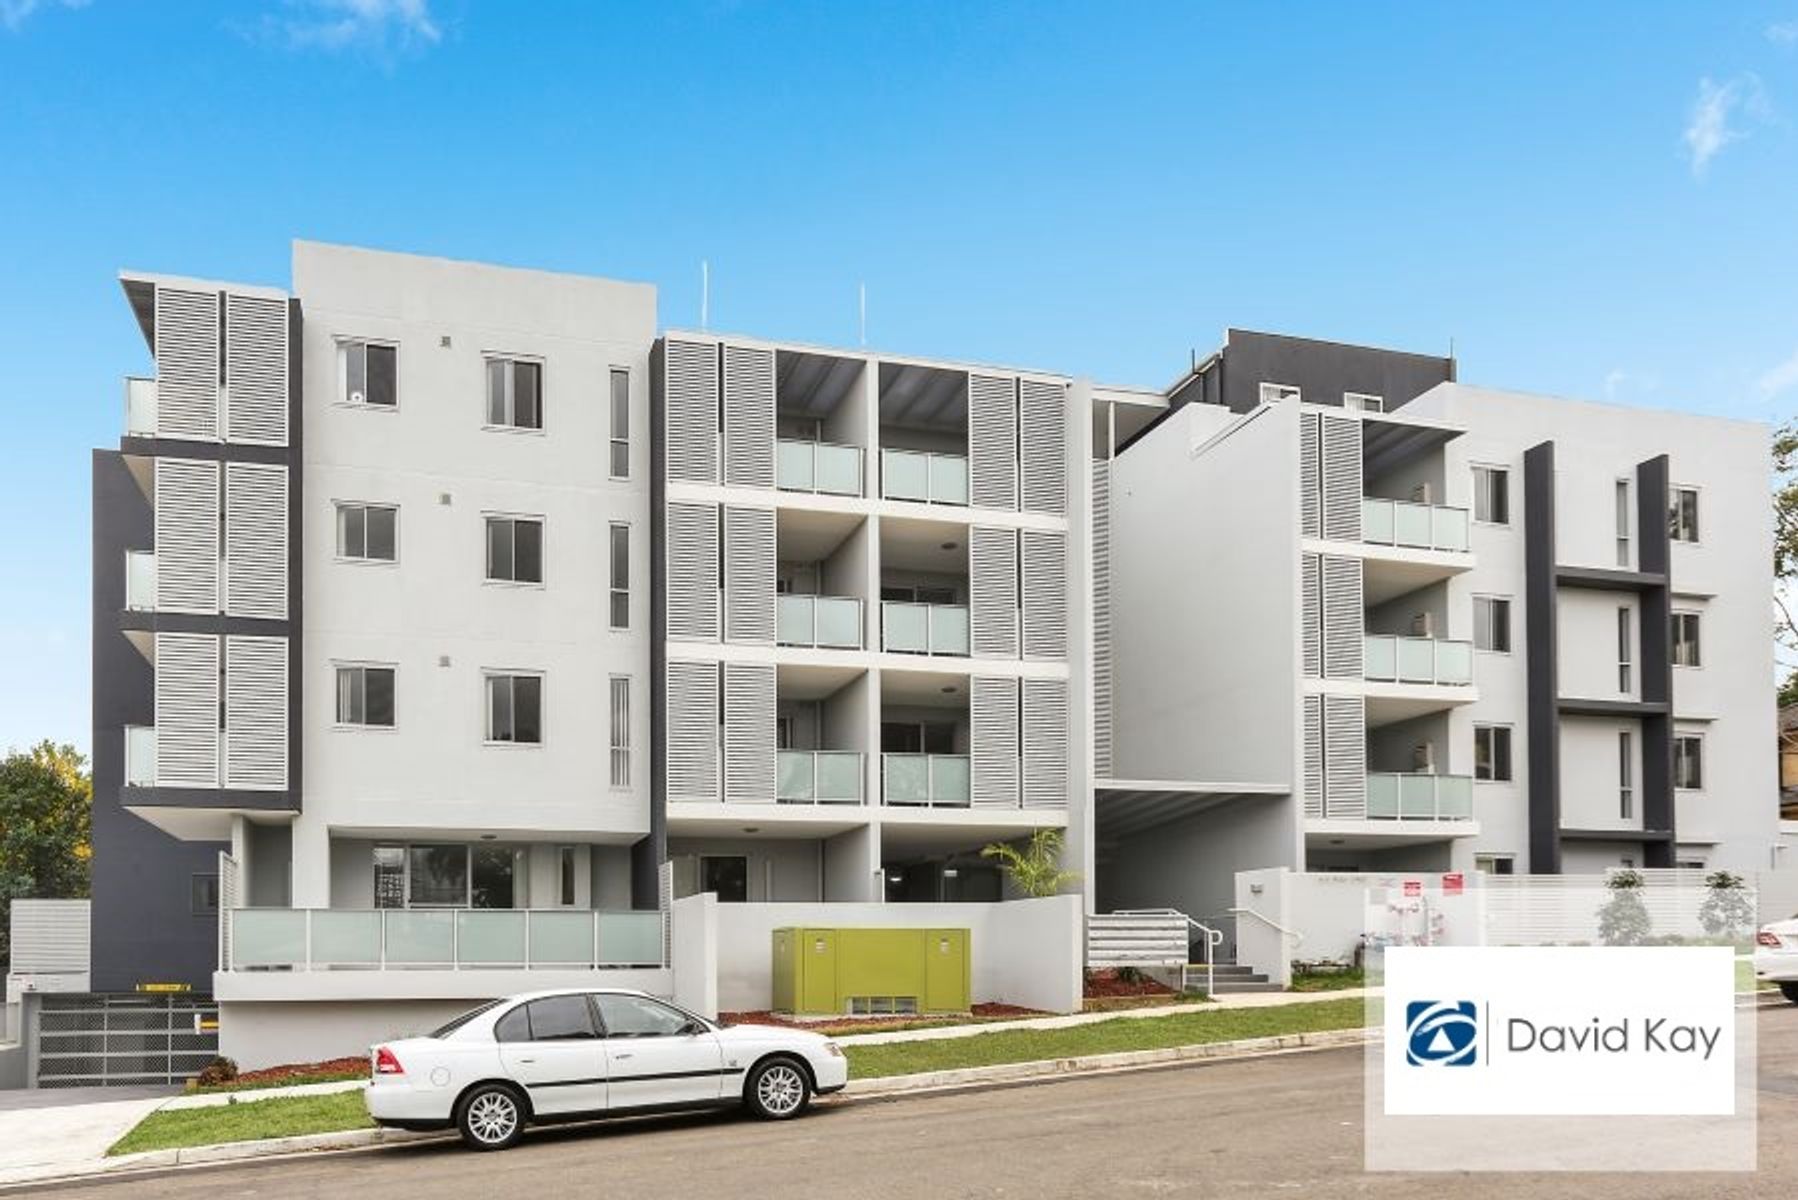 30/14-18 Peggy Street, Mays Hill, NSW 2145